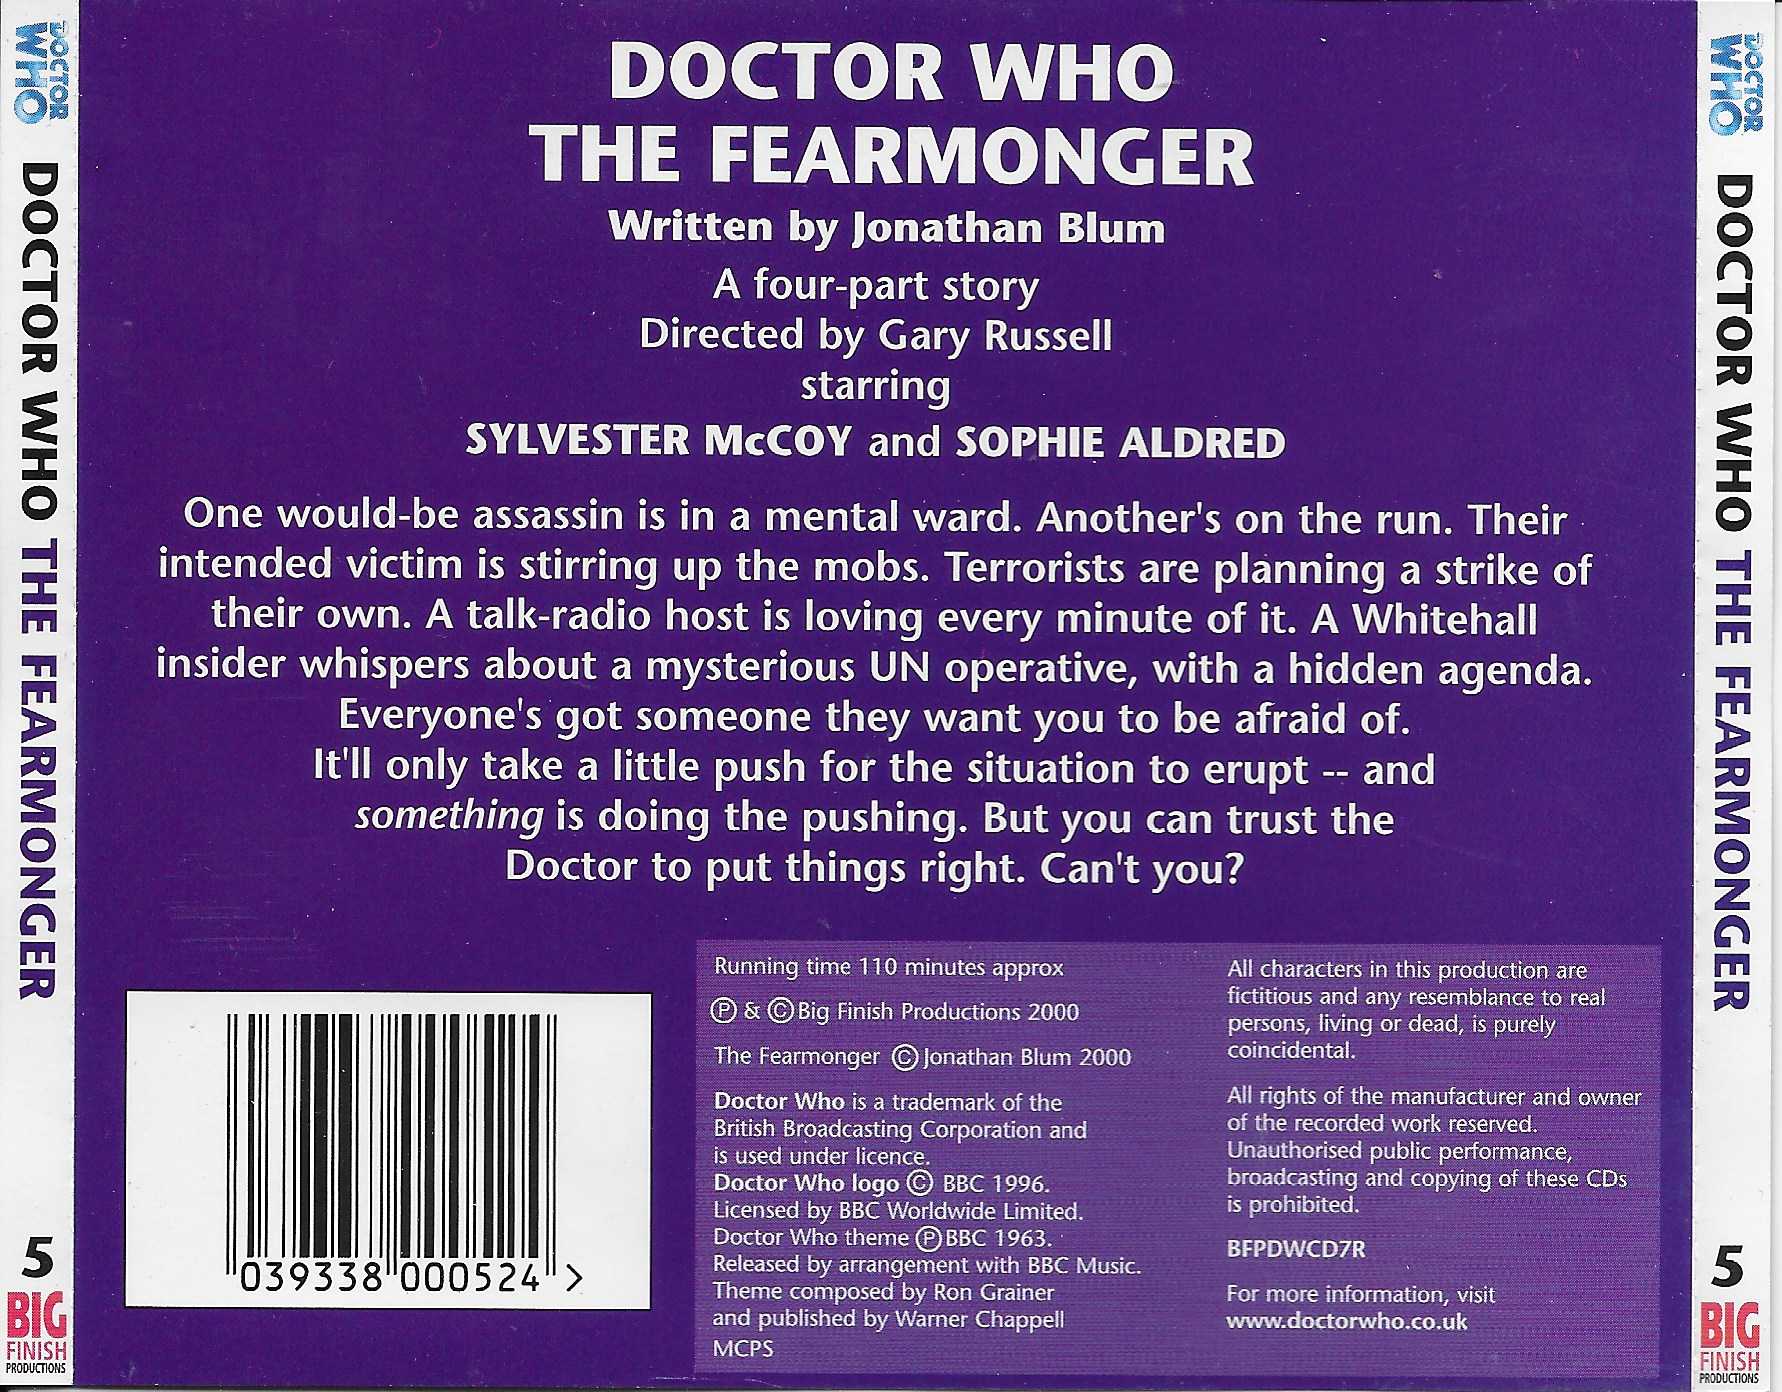 Picture of BFPDWCD 7R Doctor Who - The fearmonger by artist Jonathan Blum from the BBC records and Tapes library